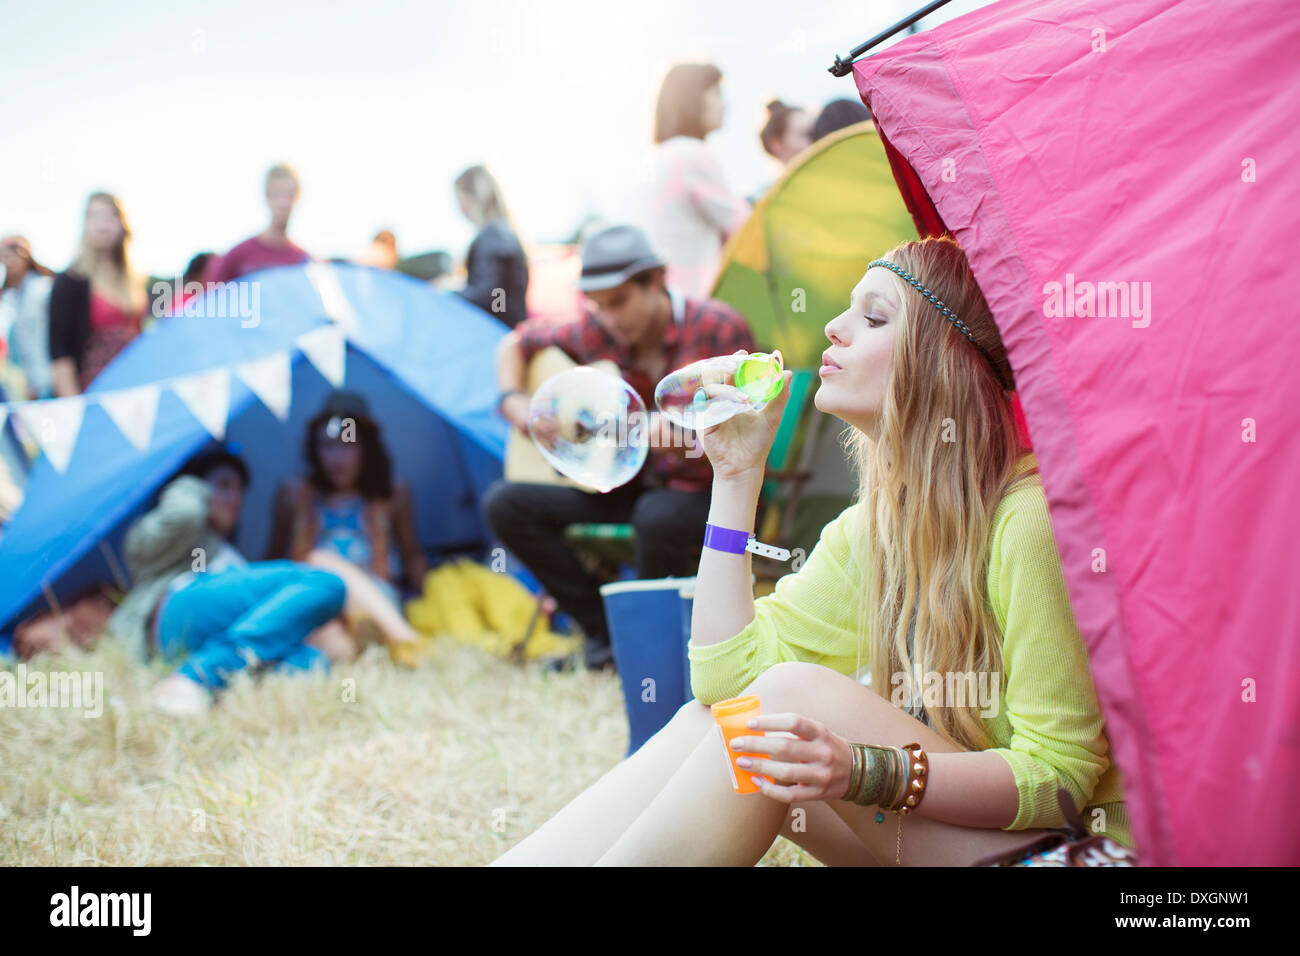 Woman blowing bubbles from tent at music festival Stock Photo